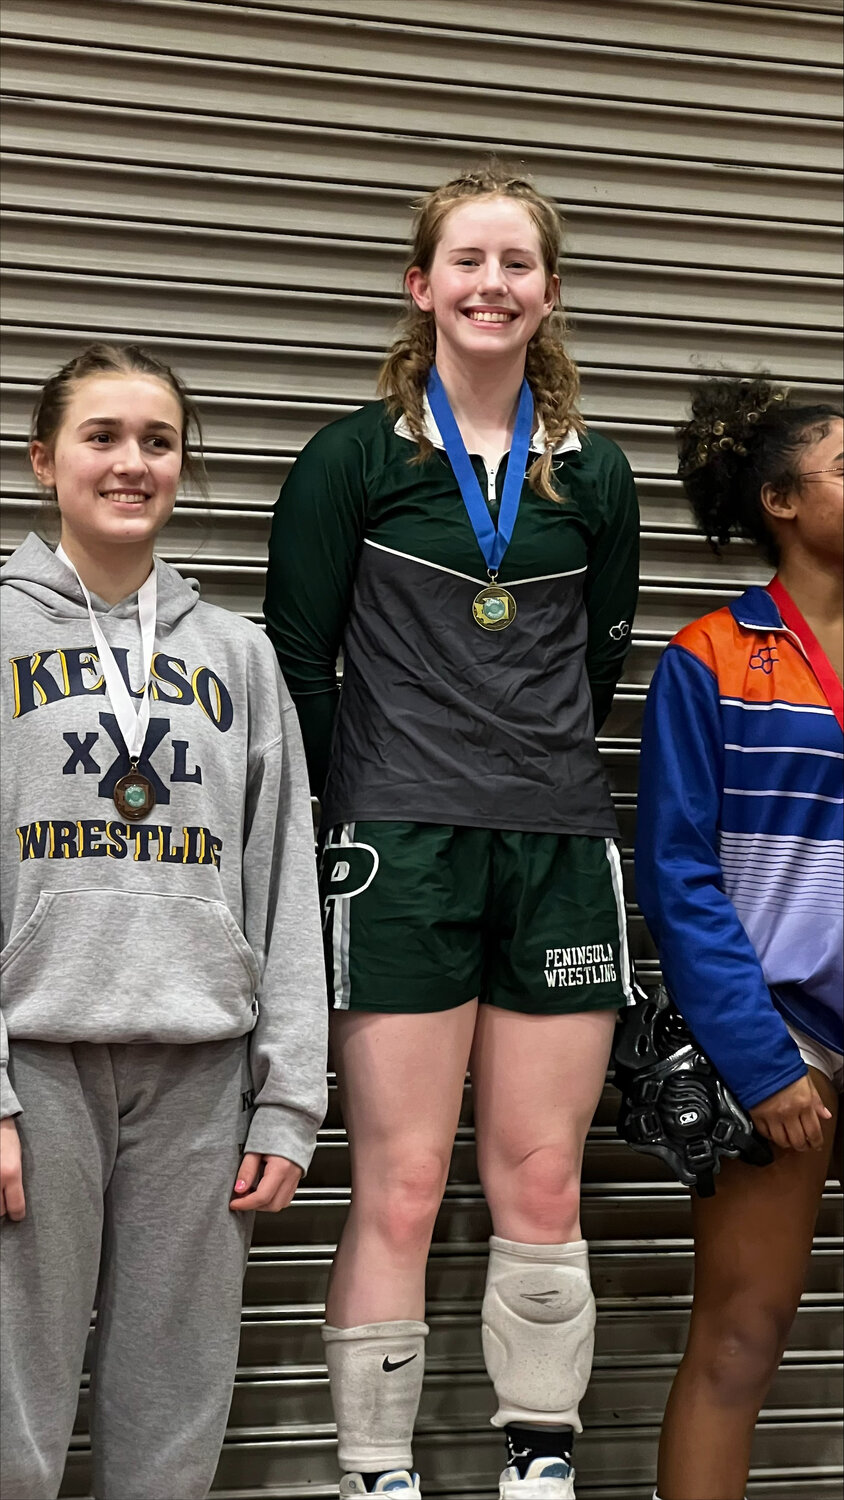 After besting last year's state champion Feb. 10, Peninsula Seahawks Mira Sonnen takes her place at the top.